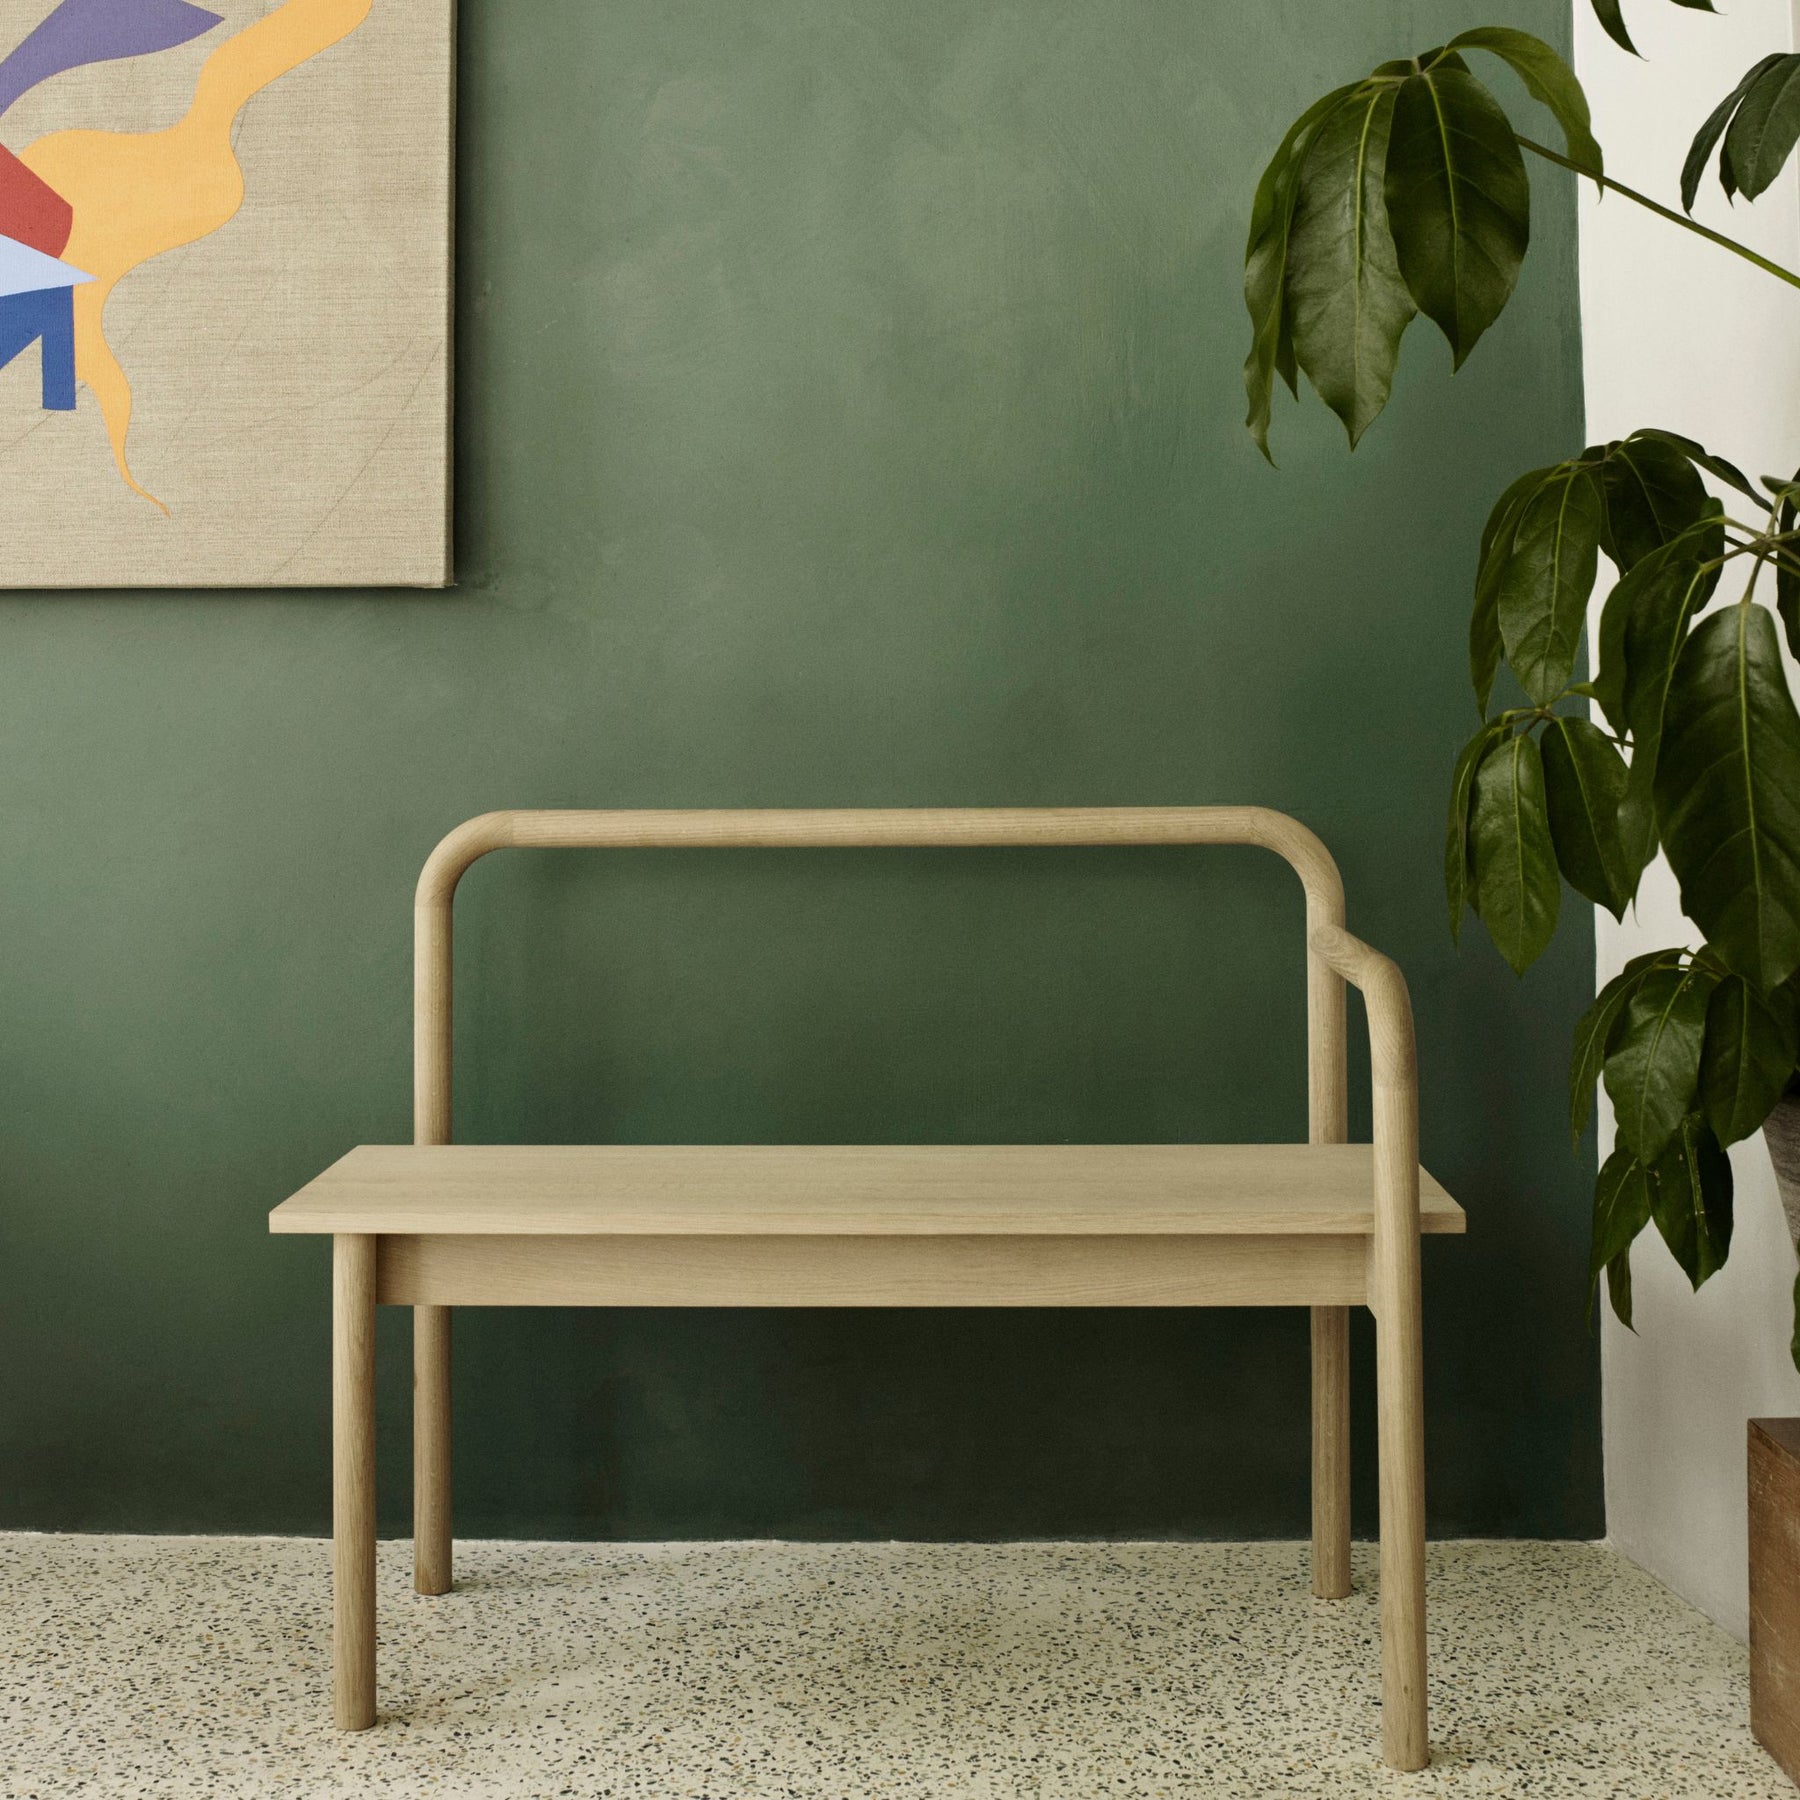 Fritz Hansen Skagerak Maissi Bench by Green Wall with Plant and Painting